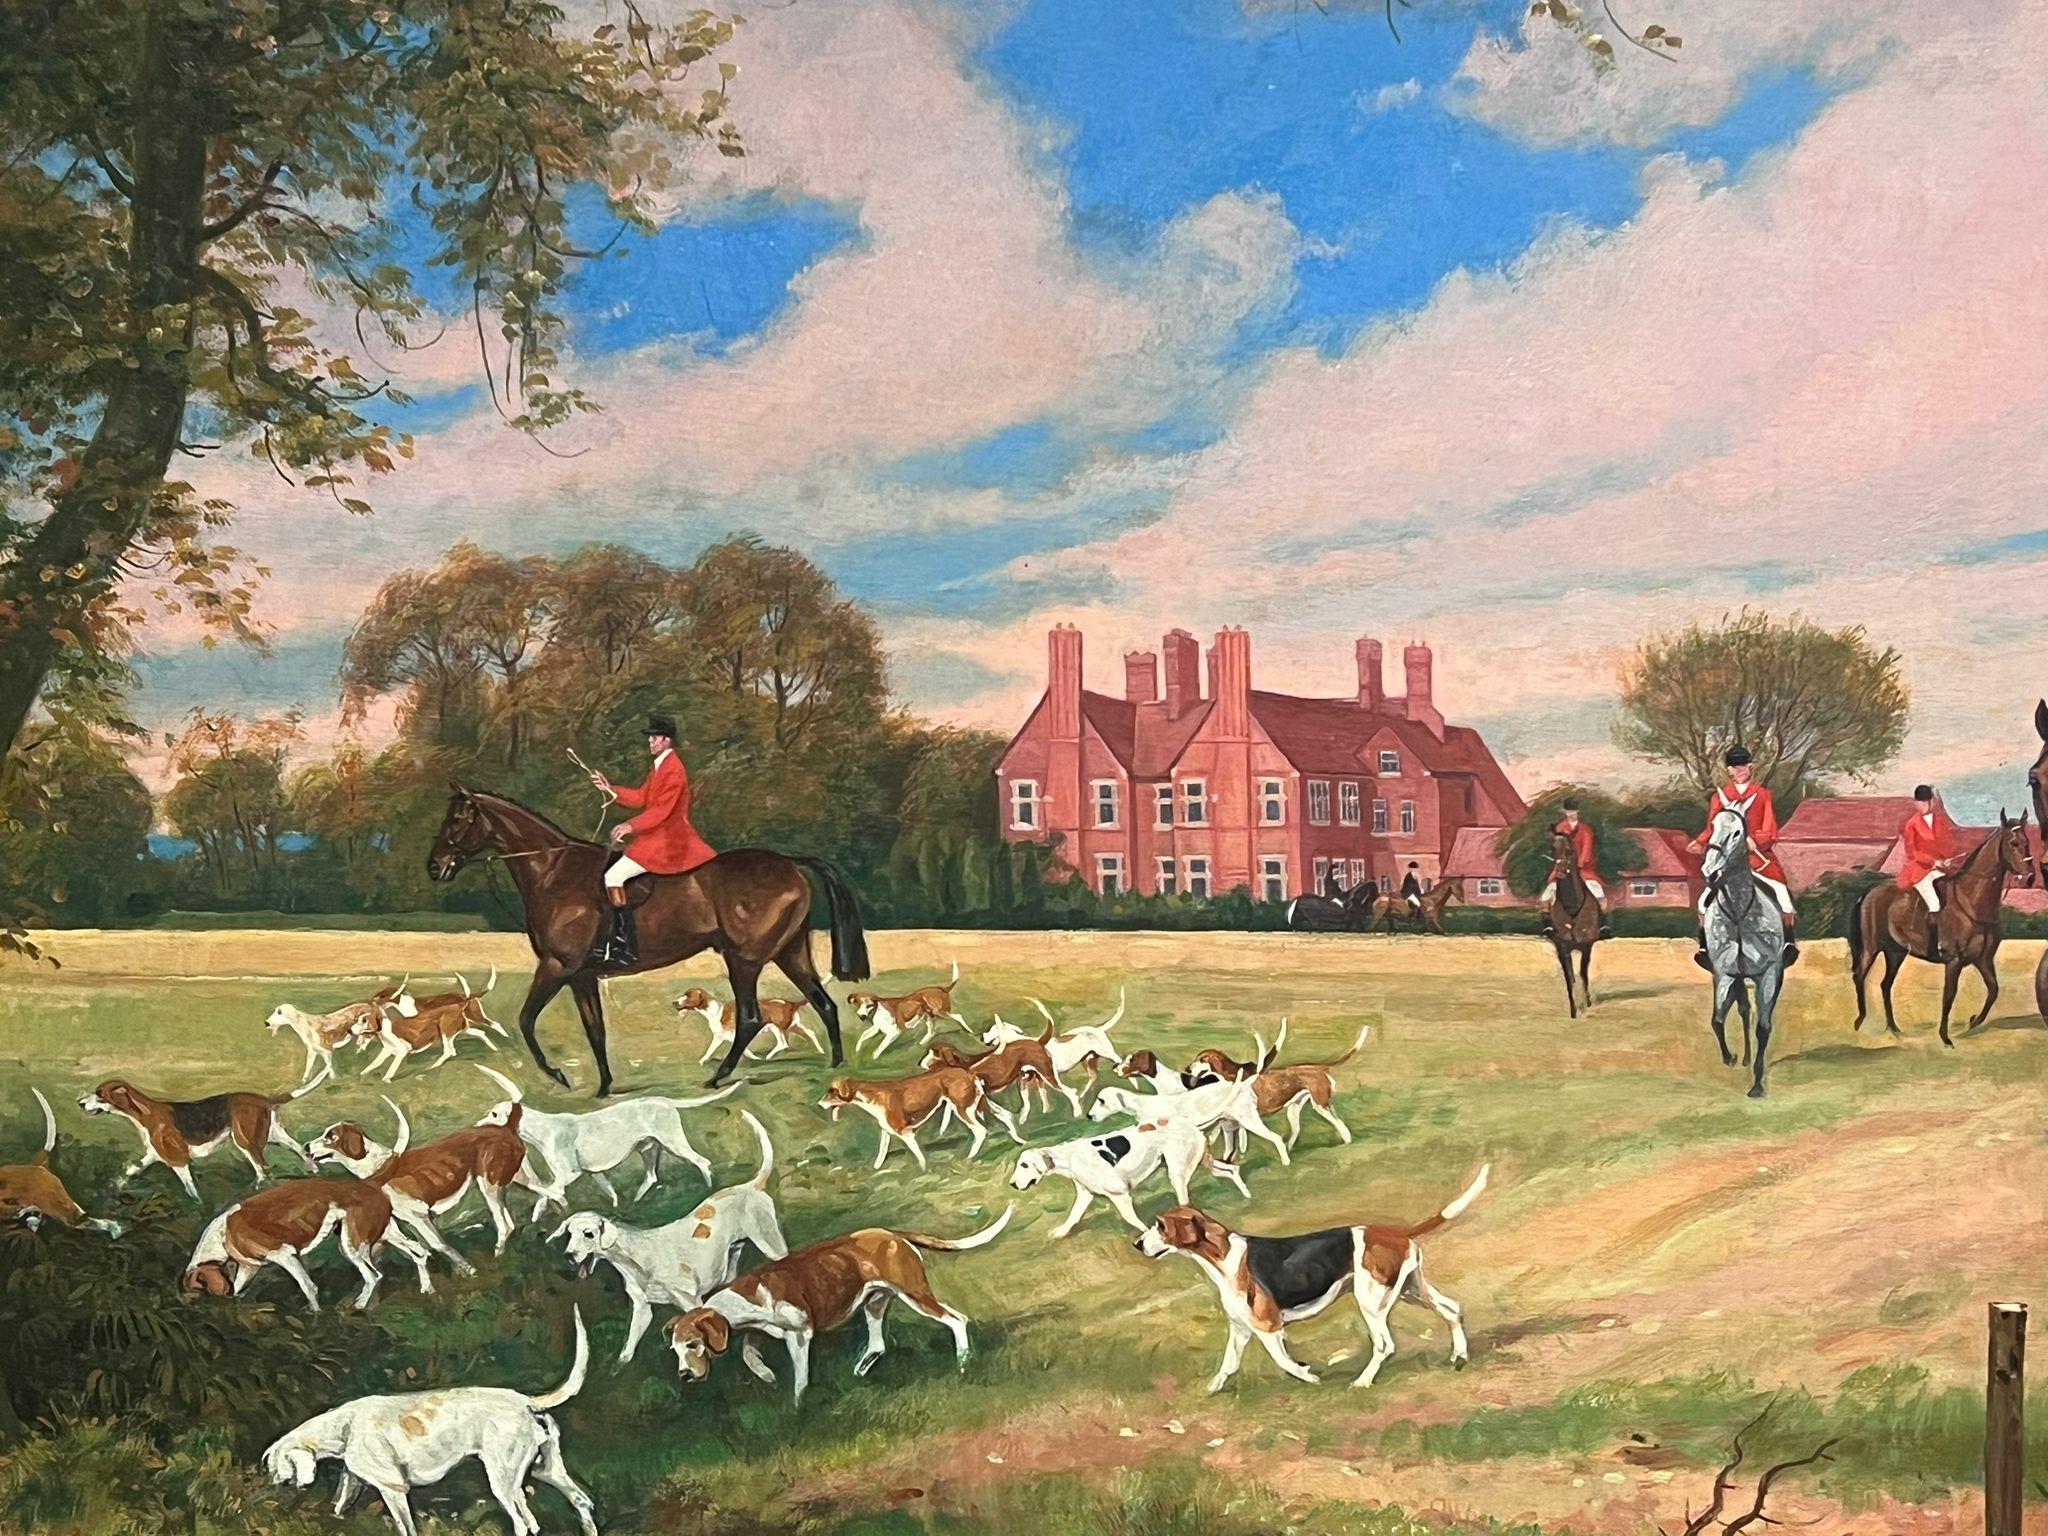 Huge British Sporting Art Oil Painting Hunting Scene Horse & Riders Before House For Sale 2